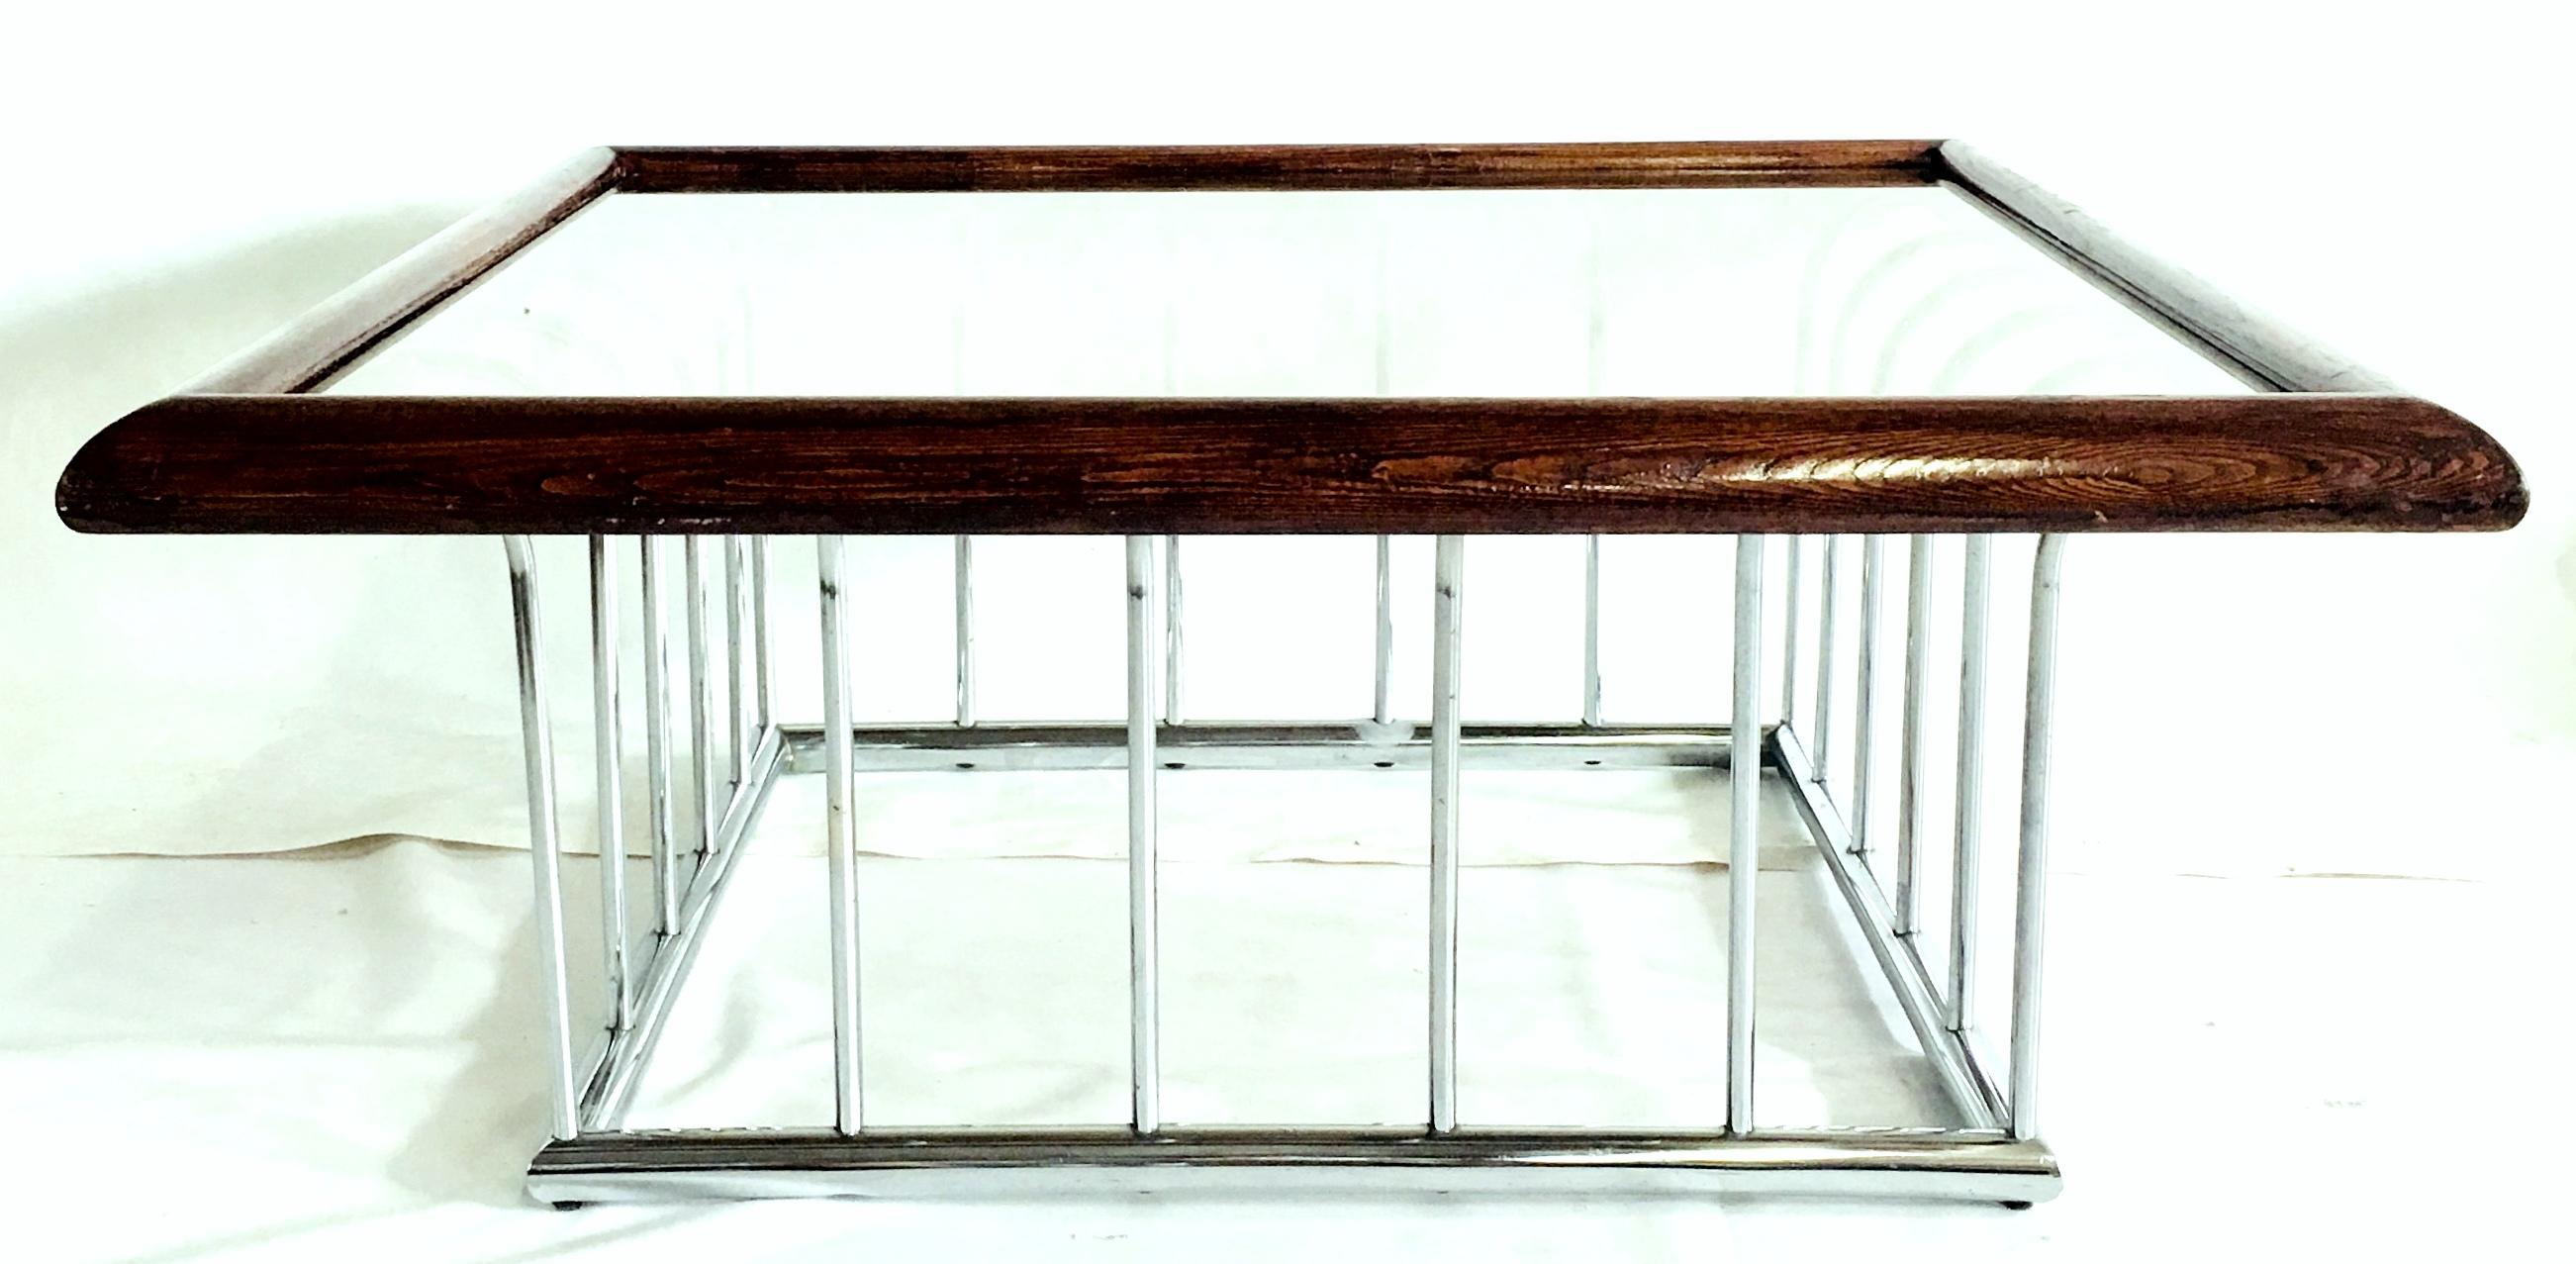 Mid-Century Modern Milo Baughman style bent tubular chrome spoke base coffee table with wood stained mahogany trim and original smoked glass top.
